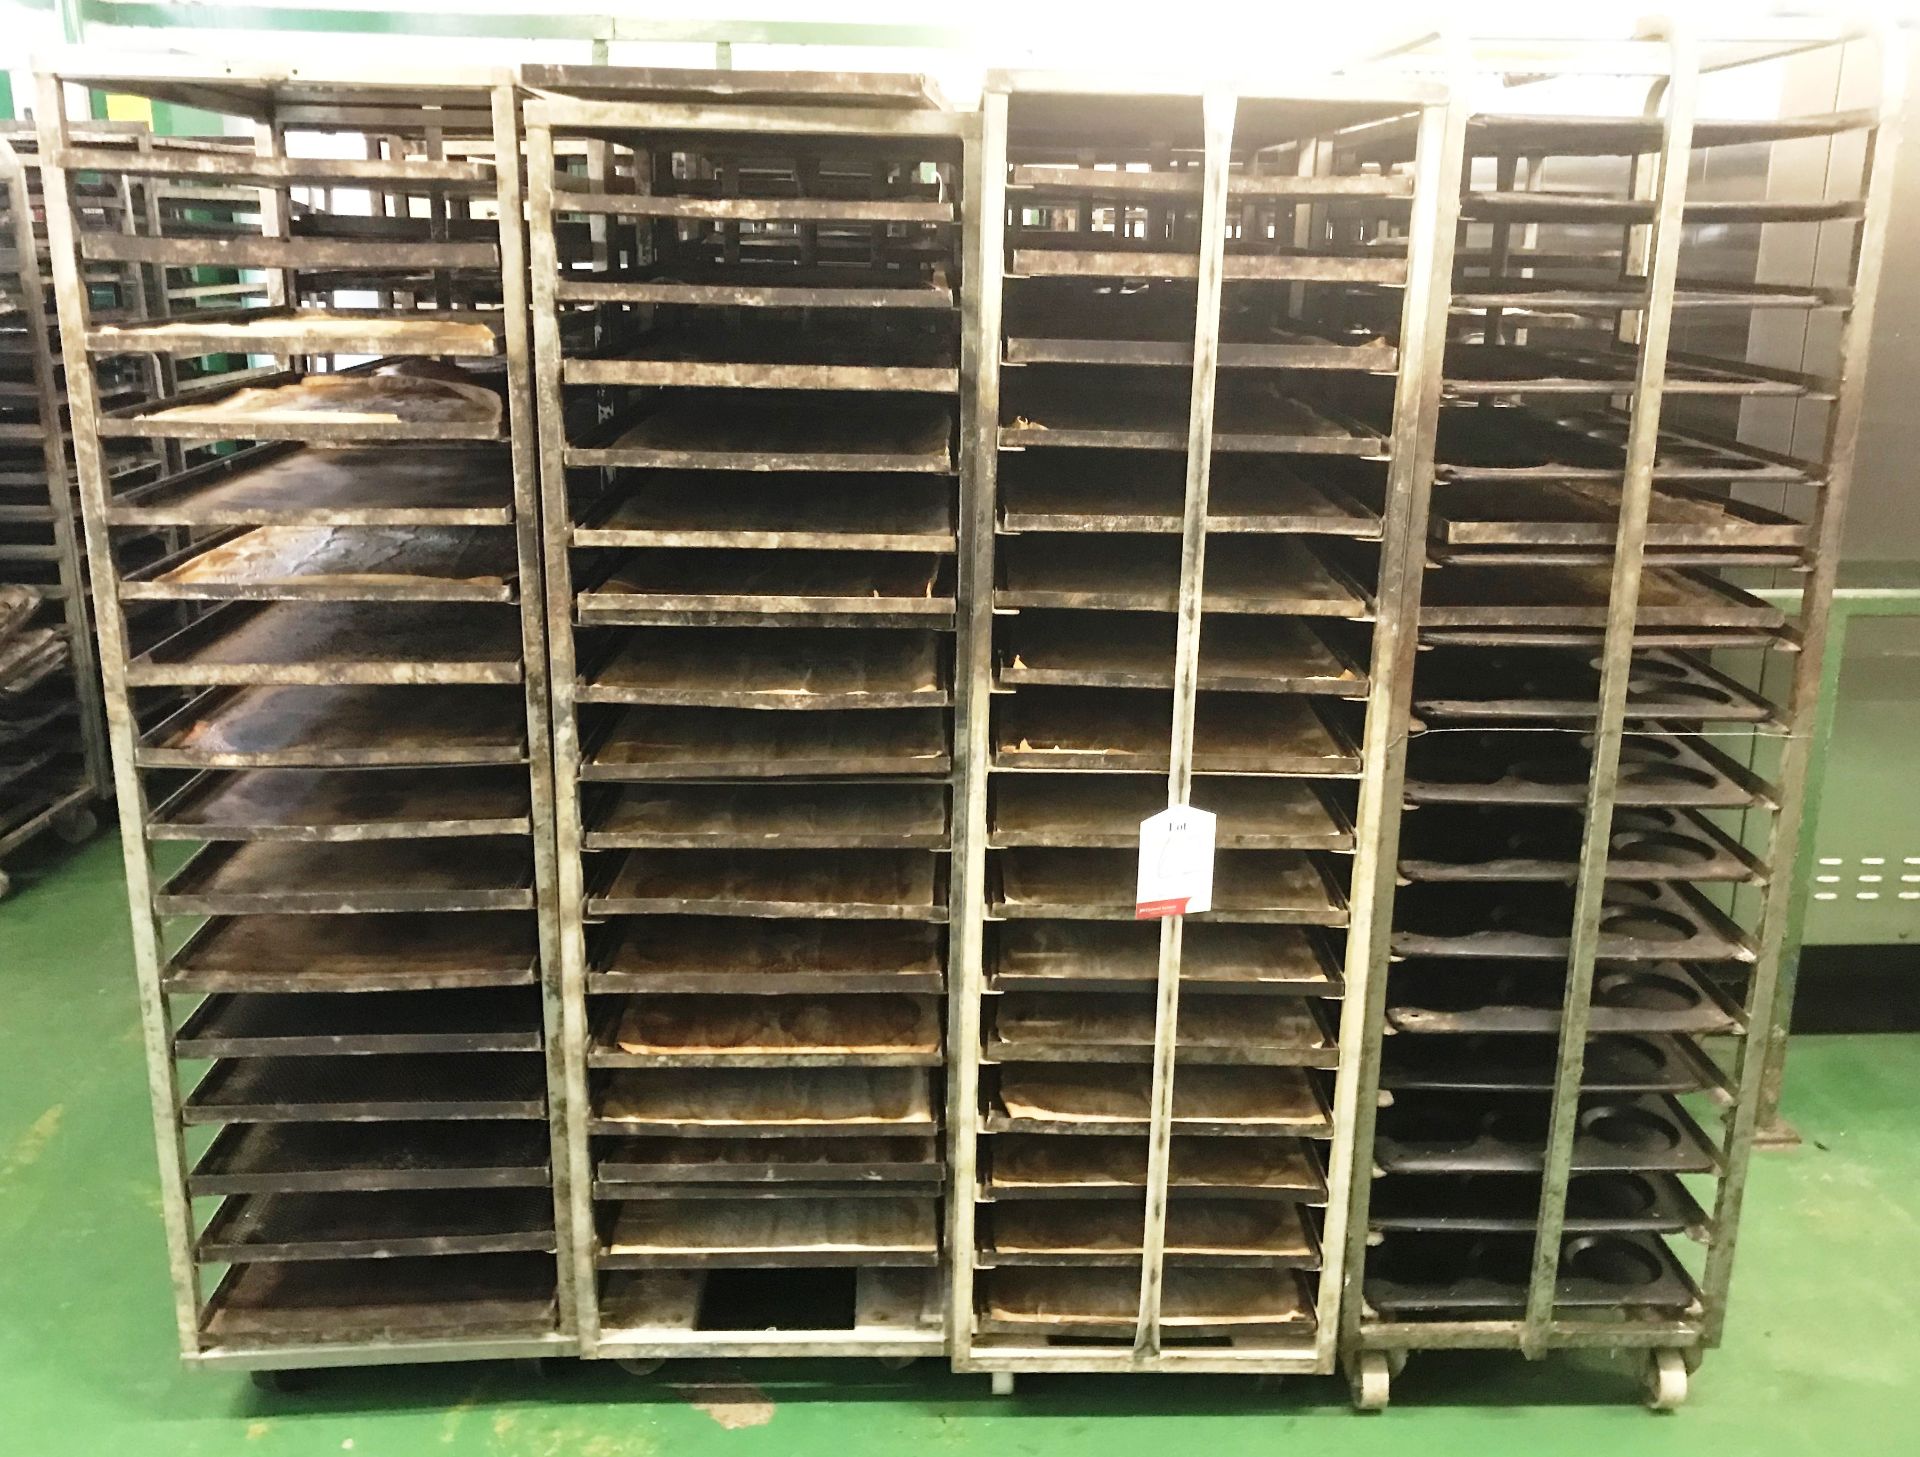 16 x Various Bakery Racks & Trays - As Pictured